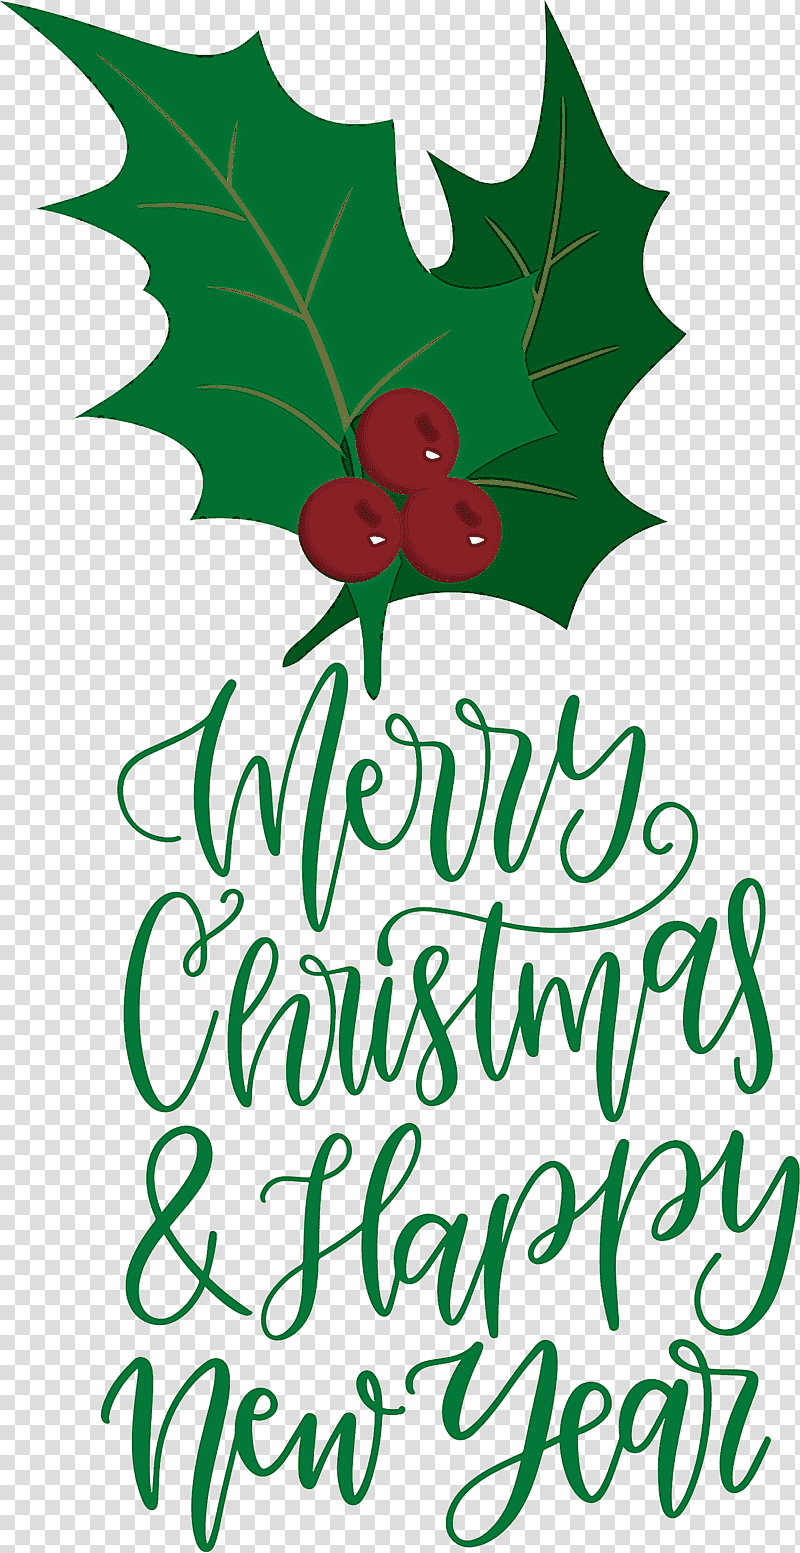 Merry Christmas Happy New Year, Bodhi Day, Christ The King, St Andrews Day, St Nicholas Day, Watch Night, Bhai Dooj transparent background PNG clipart